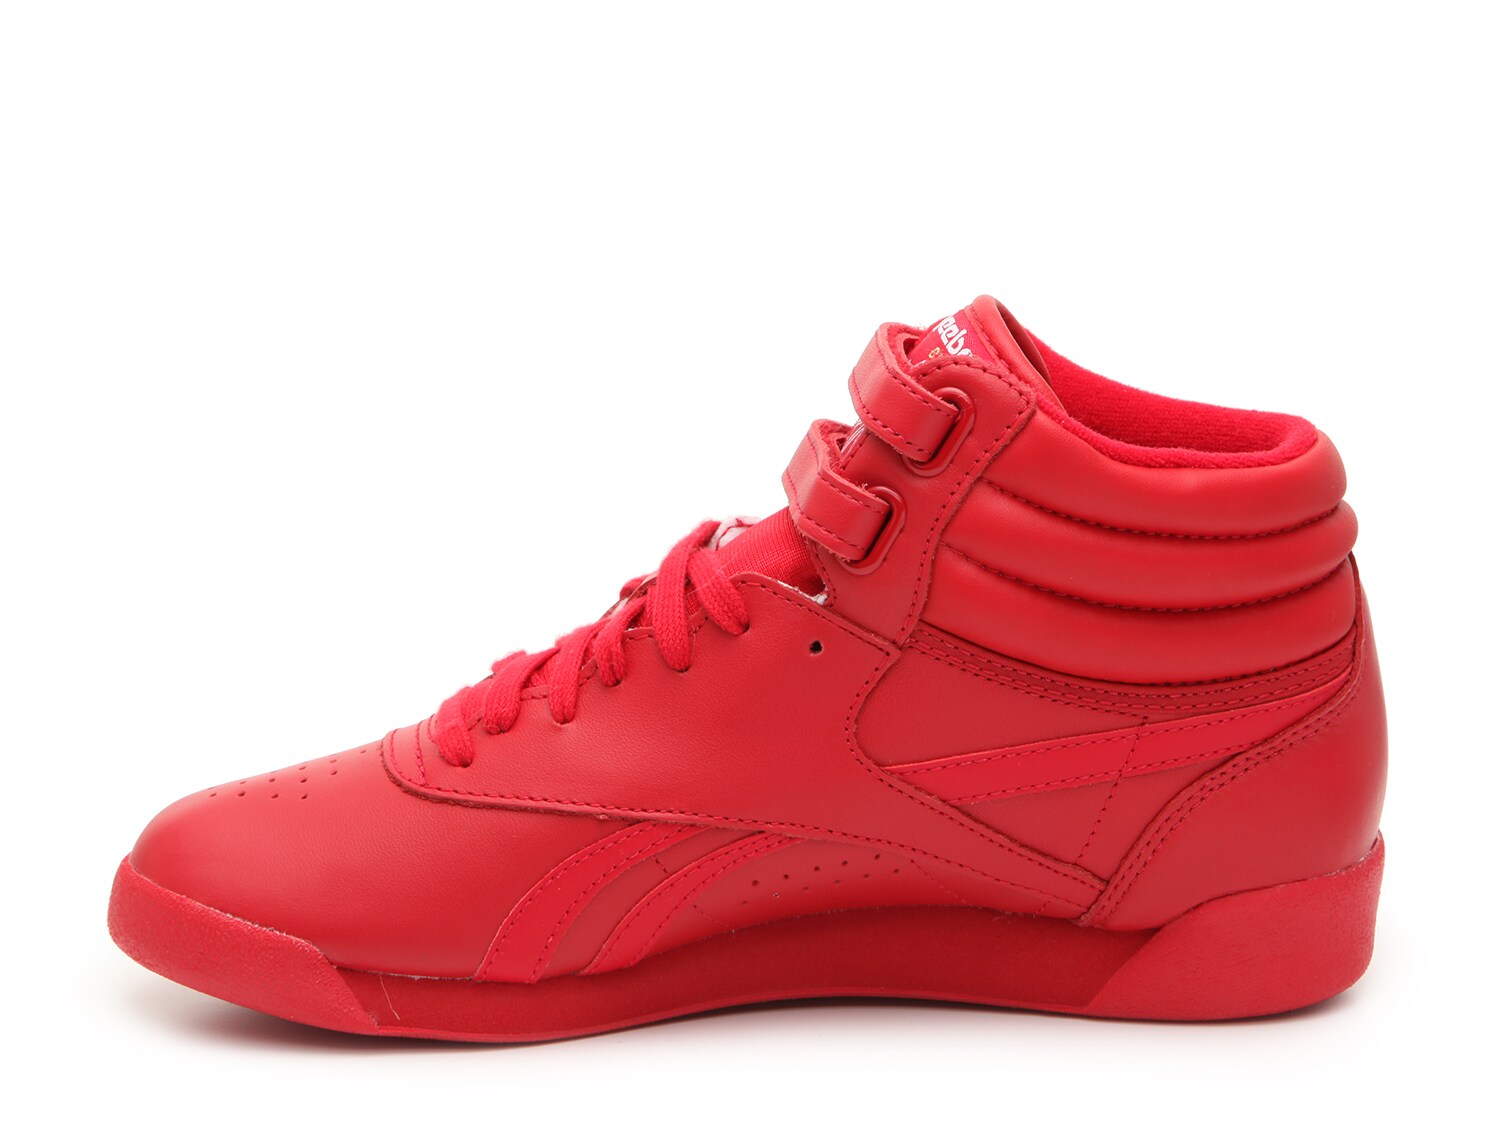 red high top reebok freestyle